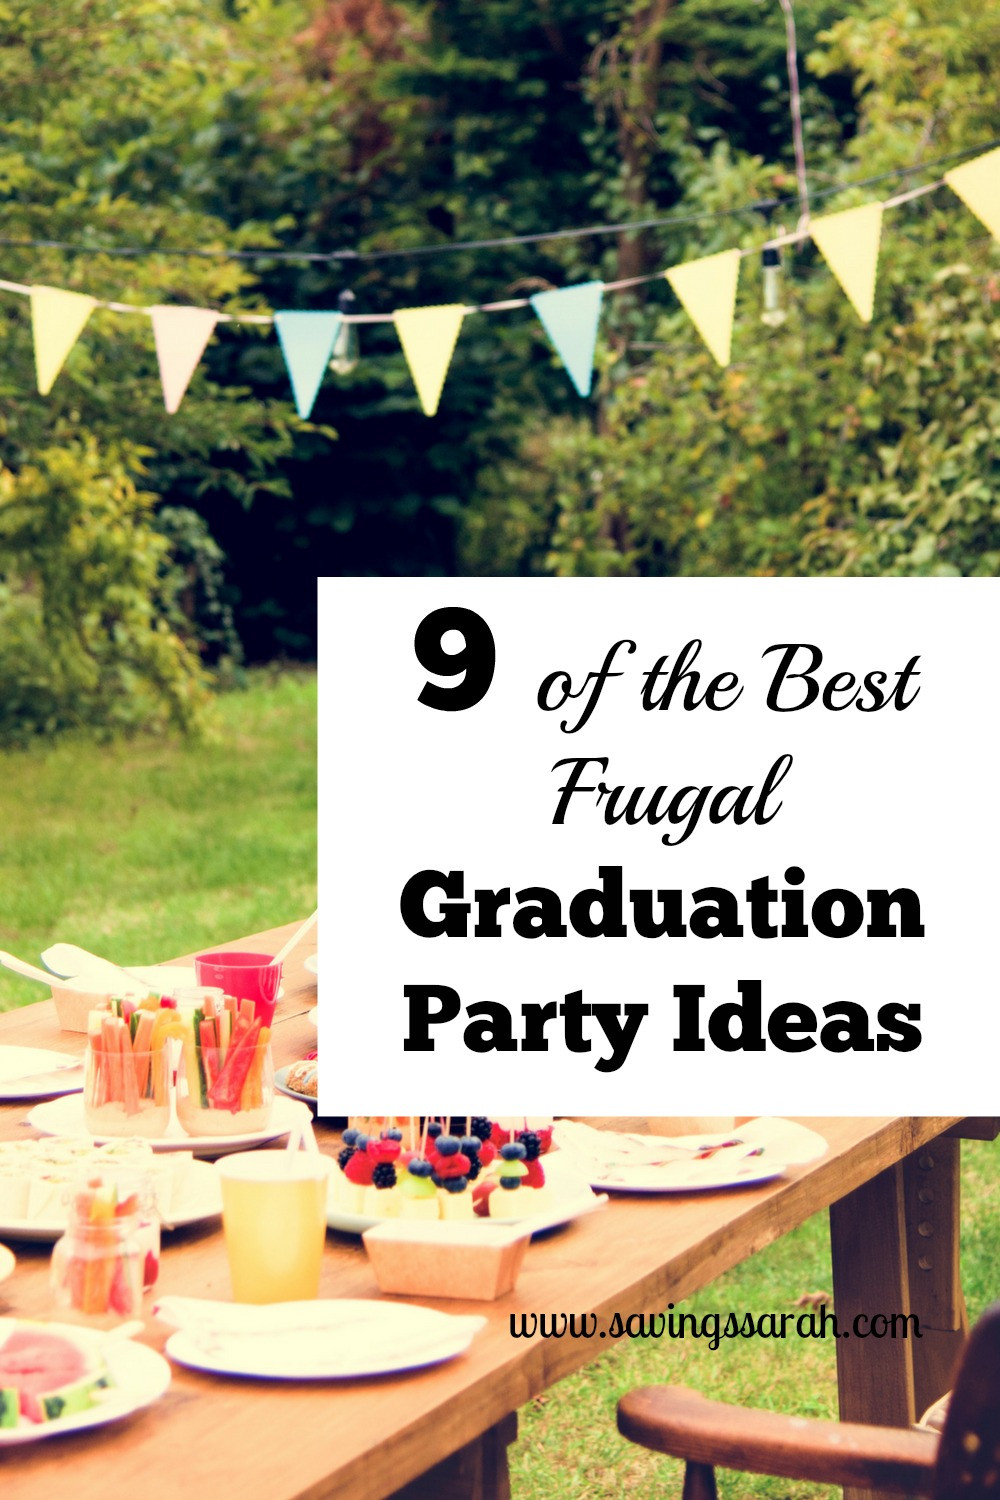 Party Ideas For High School Graduation
 9 the Best Frugal Graduation Party Ideas Earning and